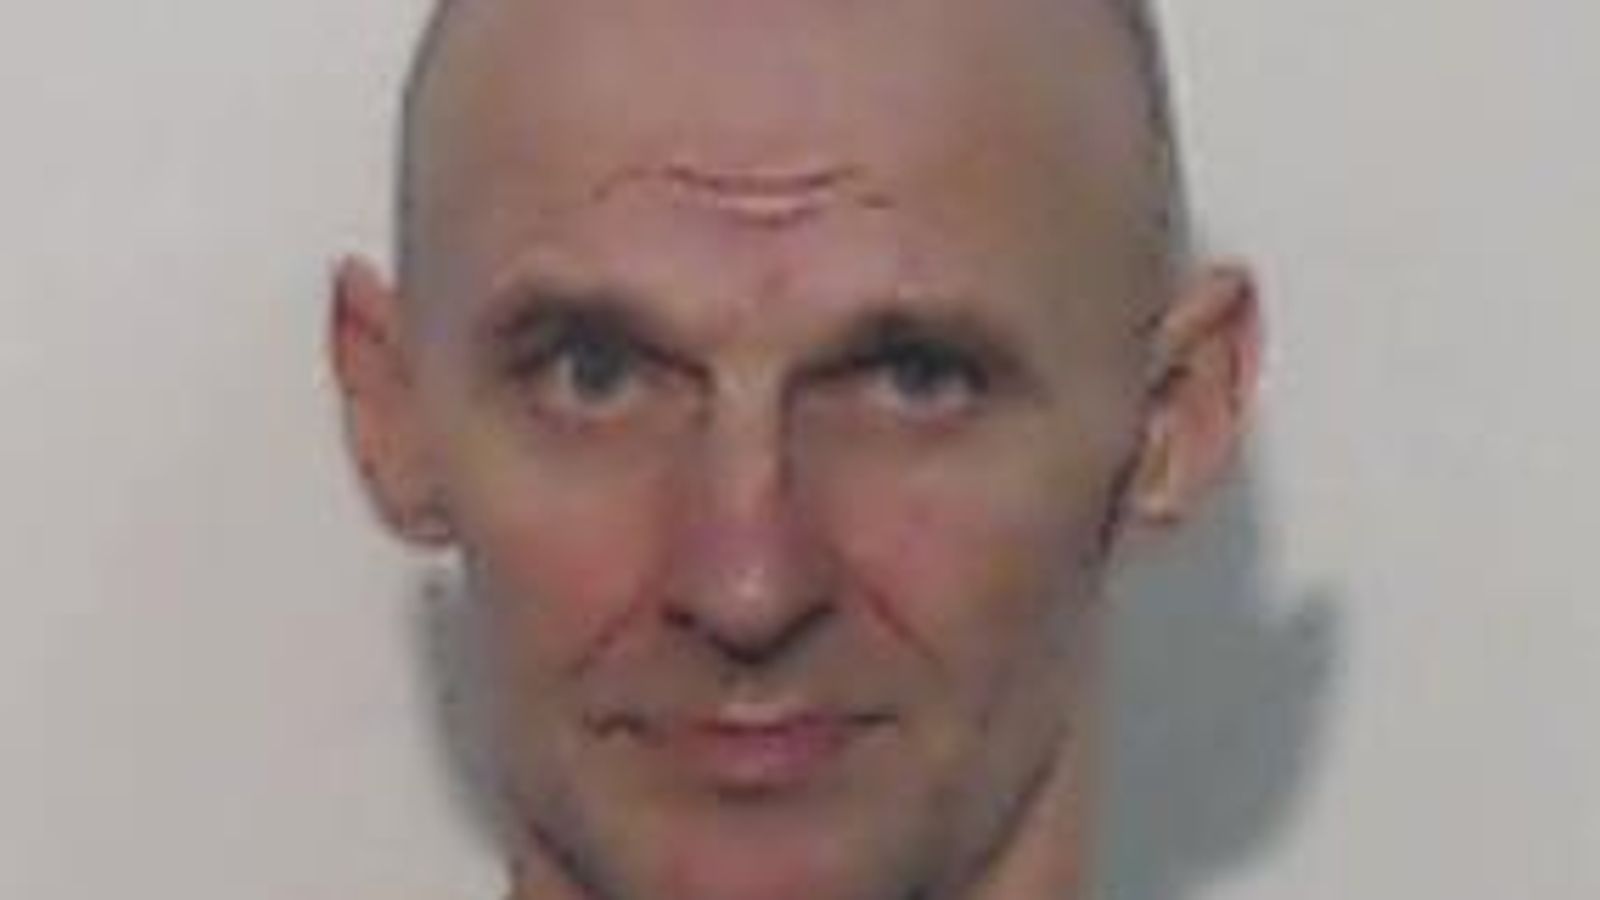 Serial rapist James Henderson jailed for 14 years for spate of attacks in Dundee and Aberdeen